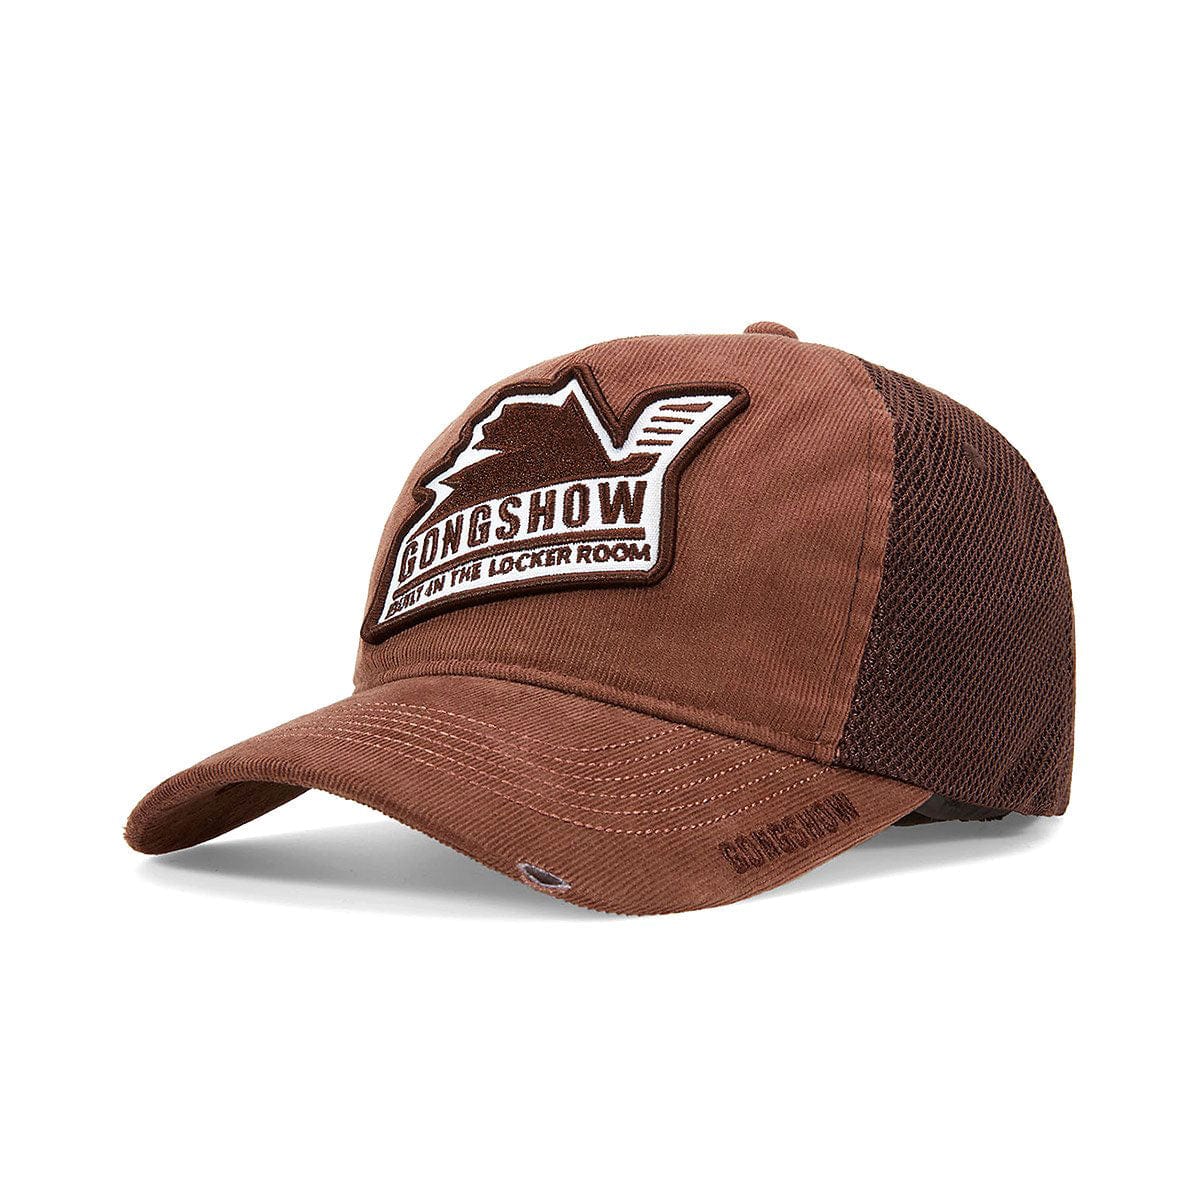 Gongshow Hockey Roughed Up Snapback Hat